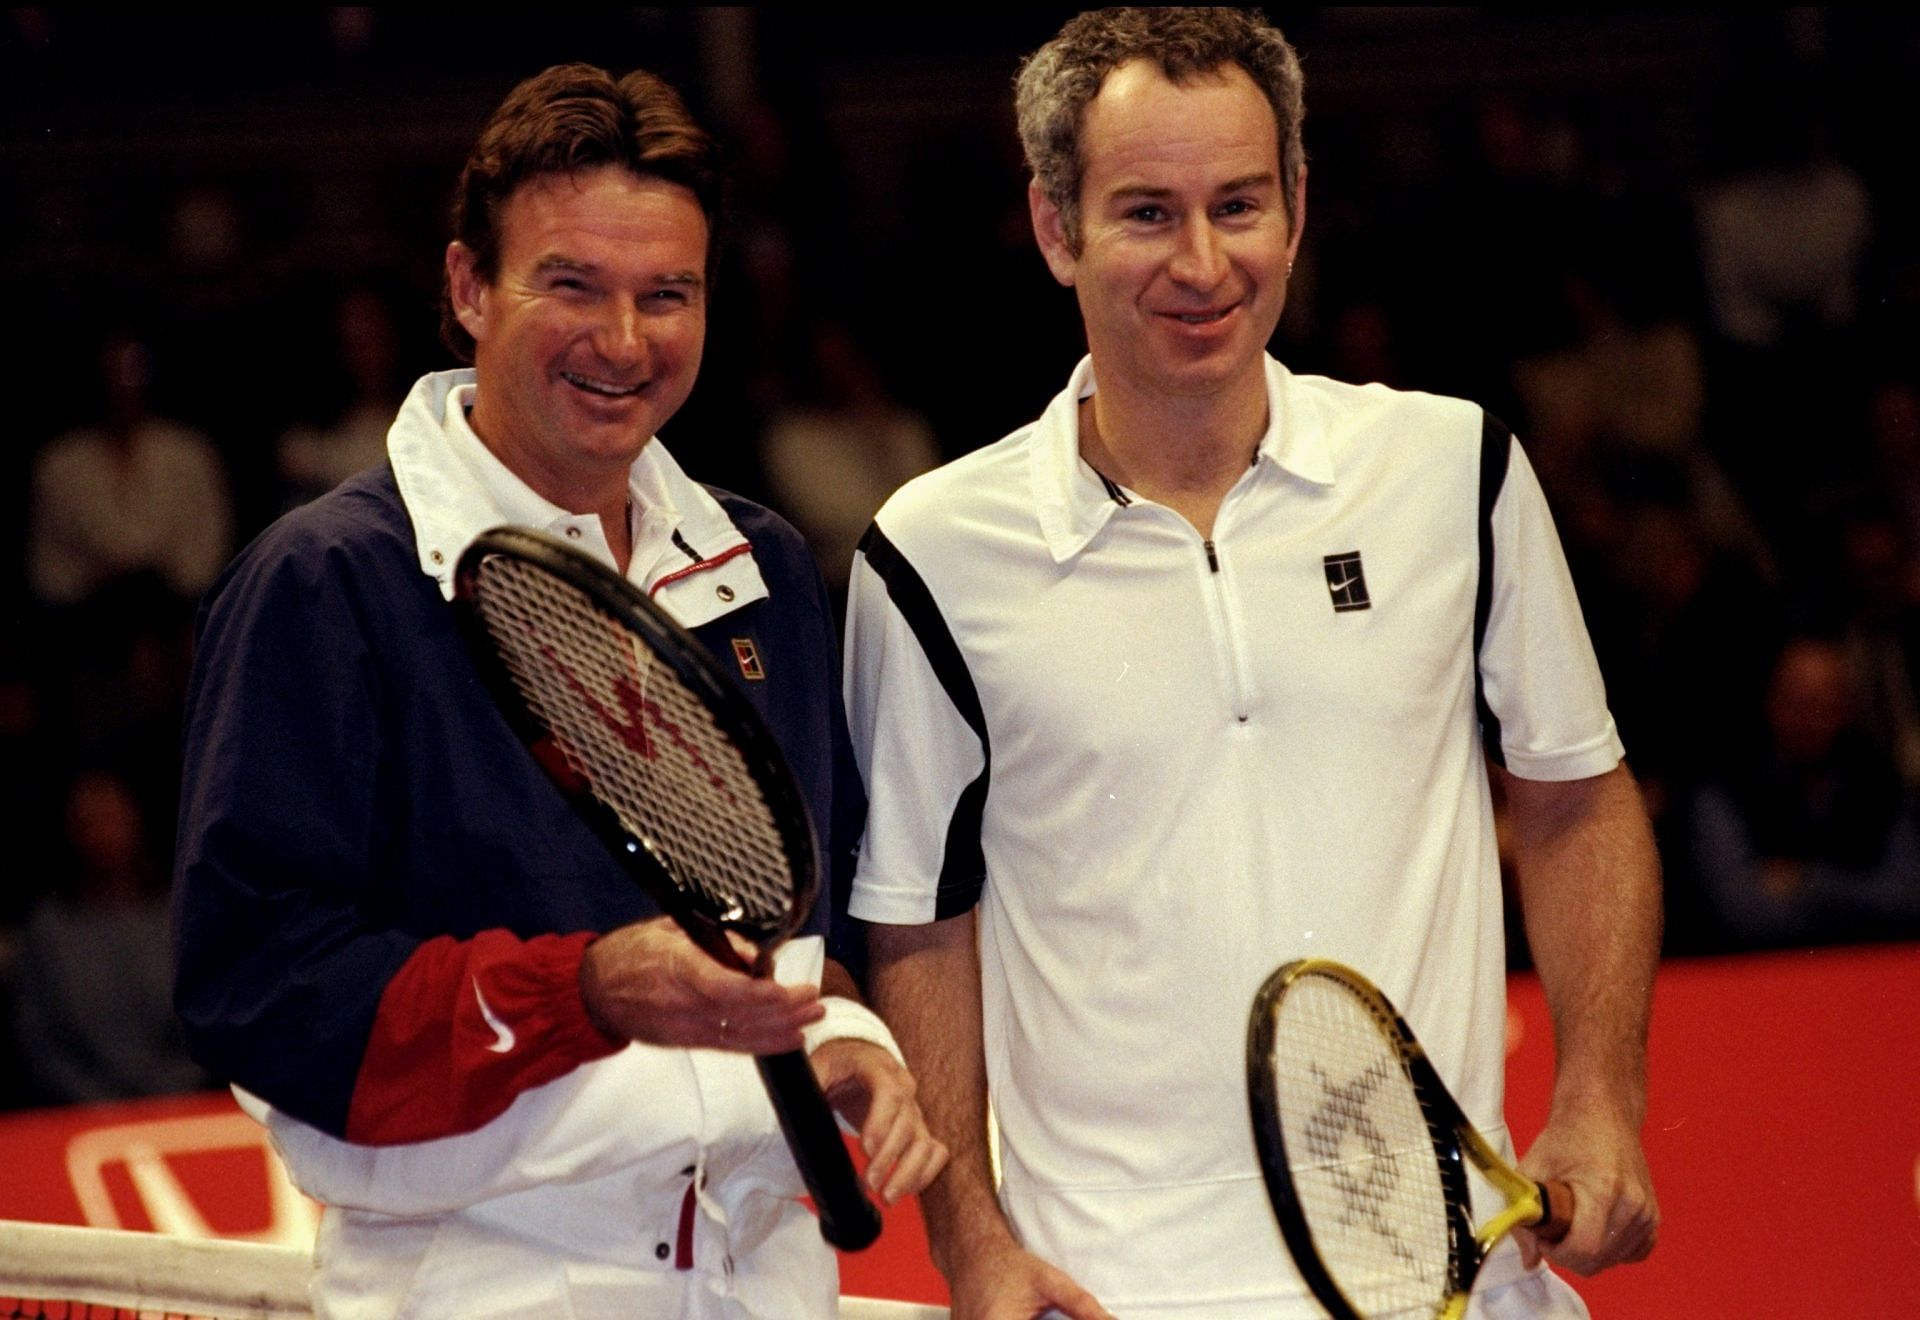 Jimmy Connors and John McEnroe of the USA